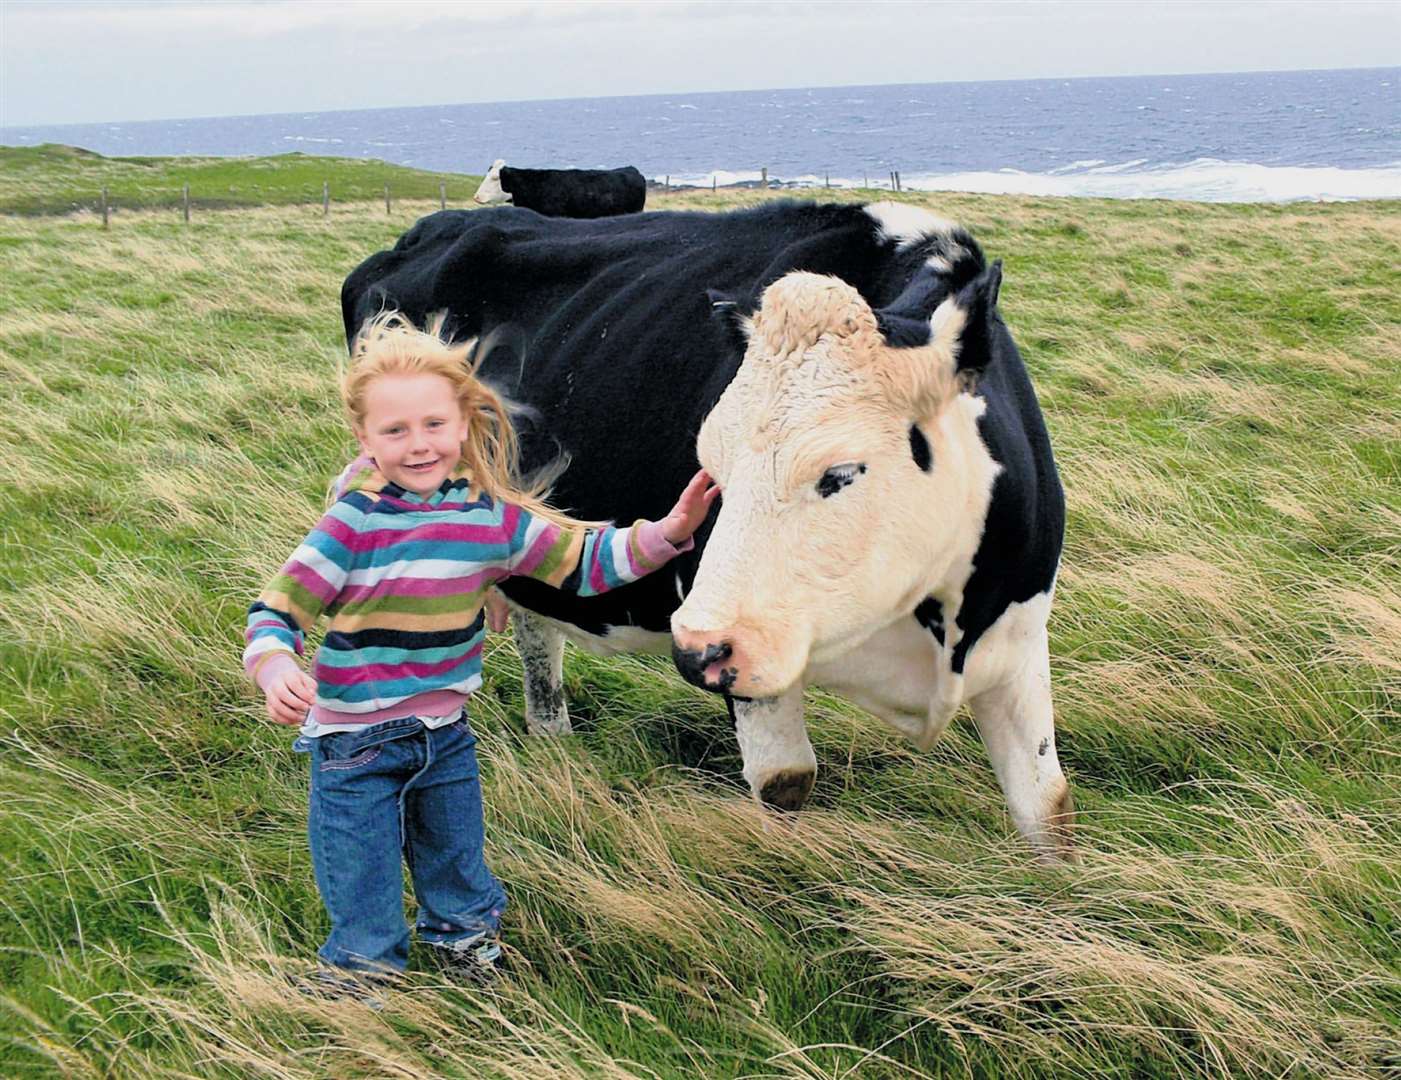 Hillhead P2 pupil Ellie Thain on her family’s farm at Staxigoe. The photo was among those showcased in the school's exhibition, At Home, at the St Fergus Gallery in January 2009.